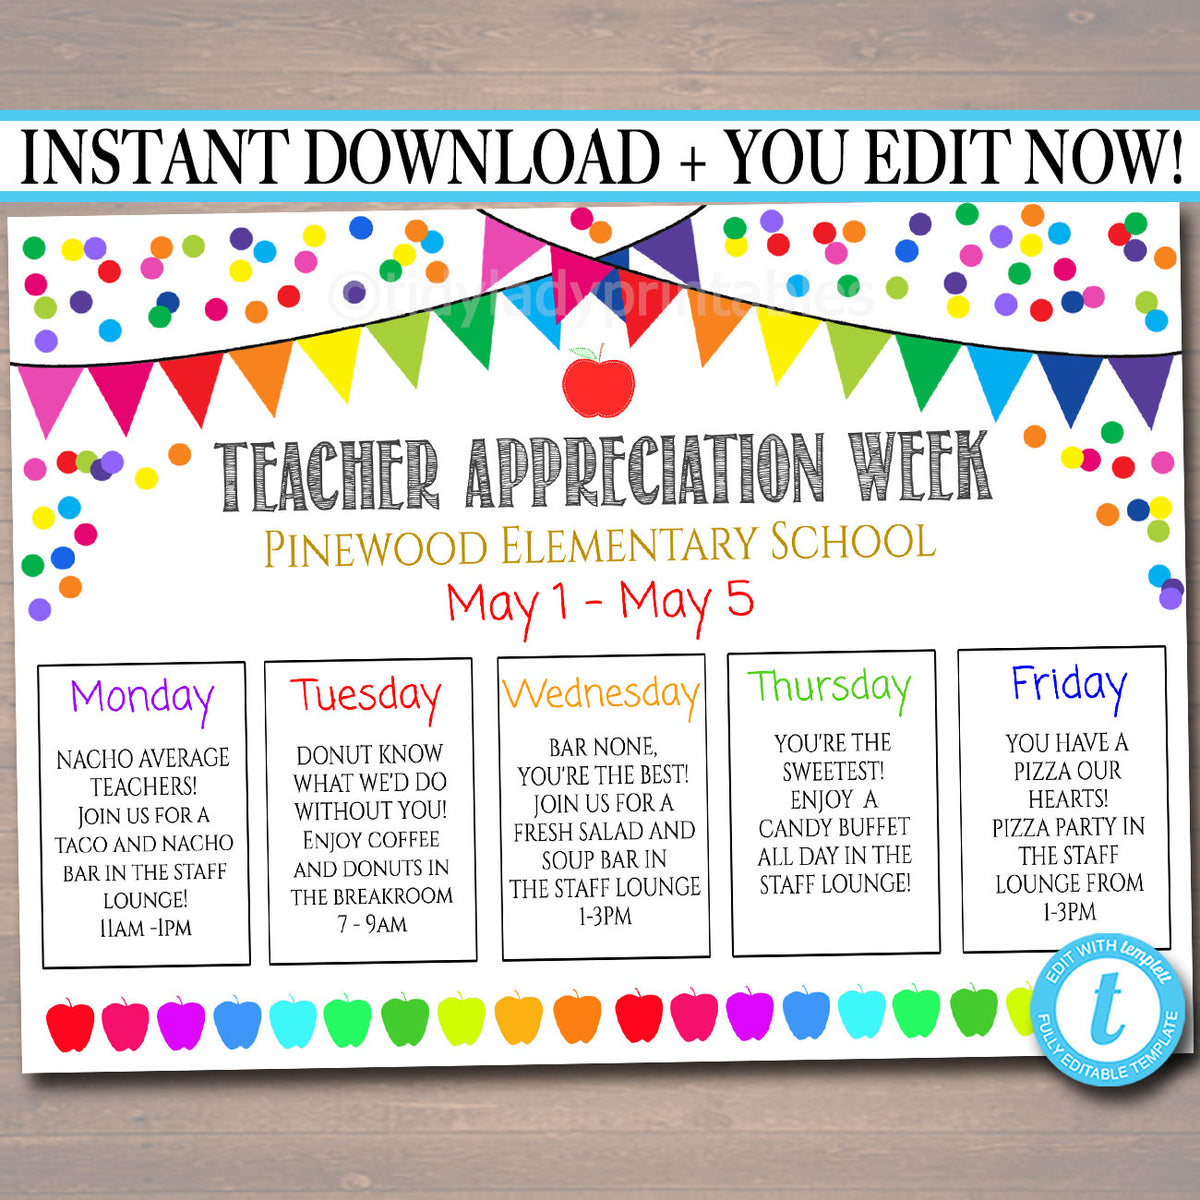 teacher-staff-appreciation-week-itinerary-poster-printable-tidylady